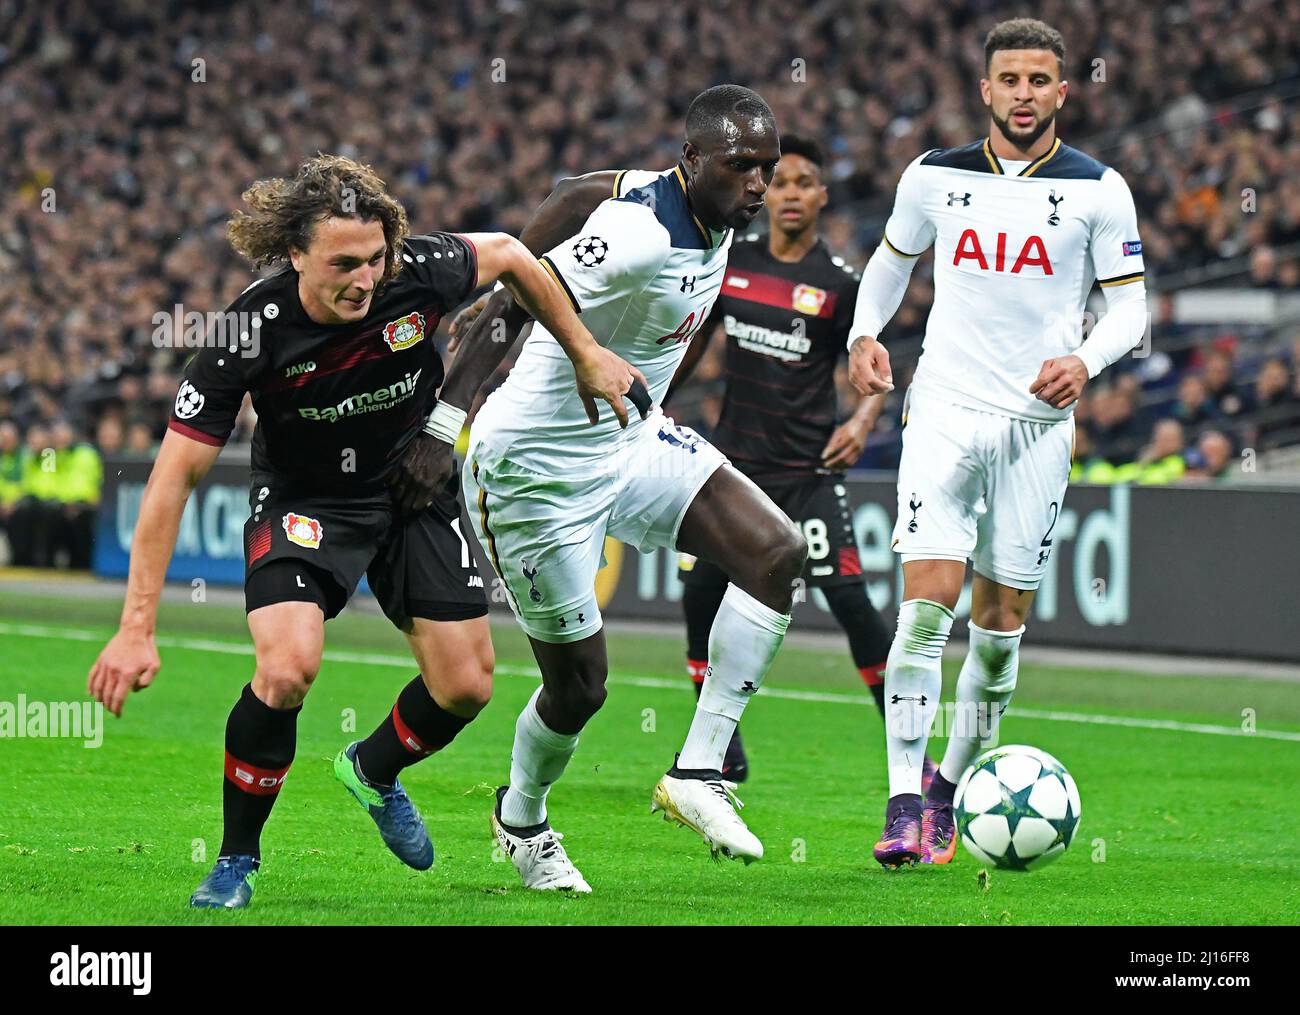 LONDON, ENGLAND - NOVEMBER 2, 2016: Julian Baumgartlinger (L) of Leverkusen and Moussa Sissoko (R) of Tottenham pictured in action during the UEFA Champions League Group E game between Tottenham Hotspur and Bayern Leverkusen at Wembley Stadium. Copyright: Cosmin Iftode/Picstaff Stock Photo